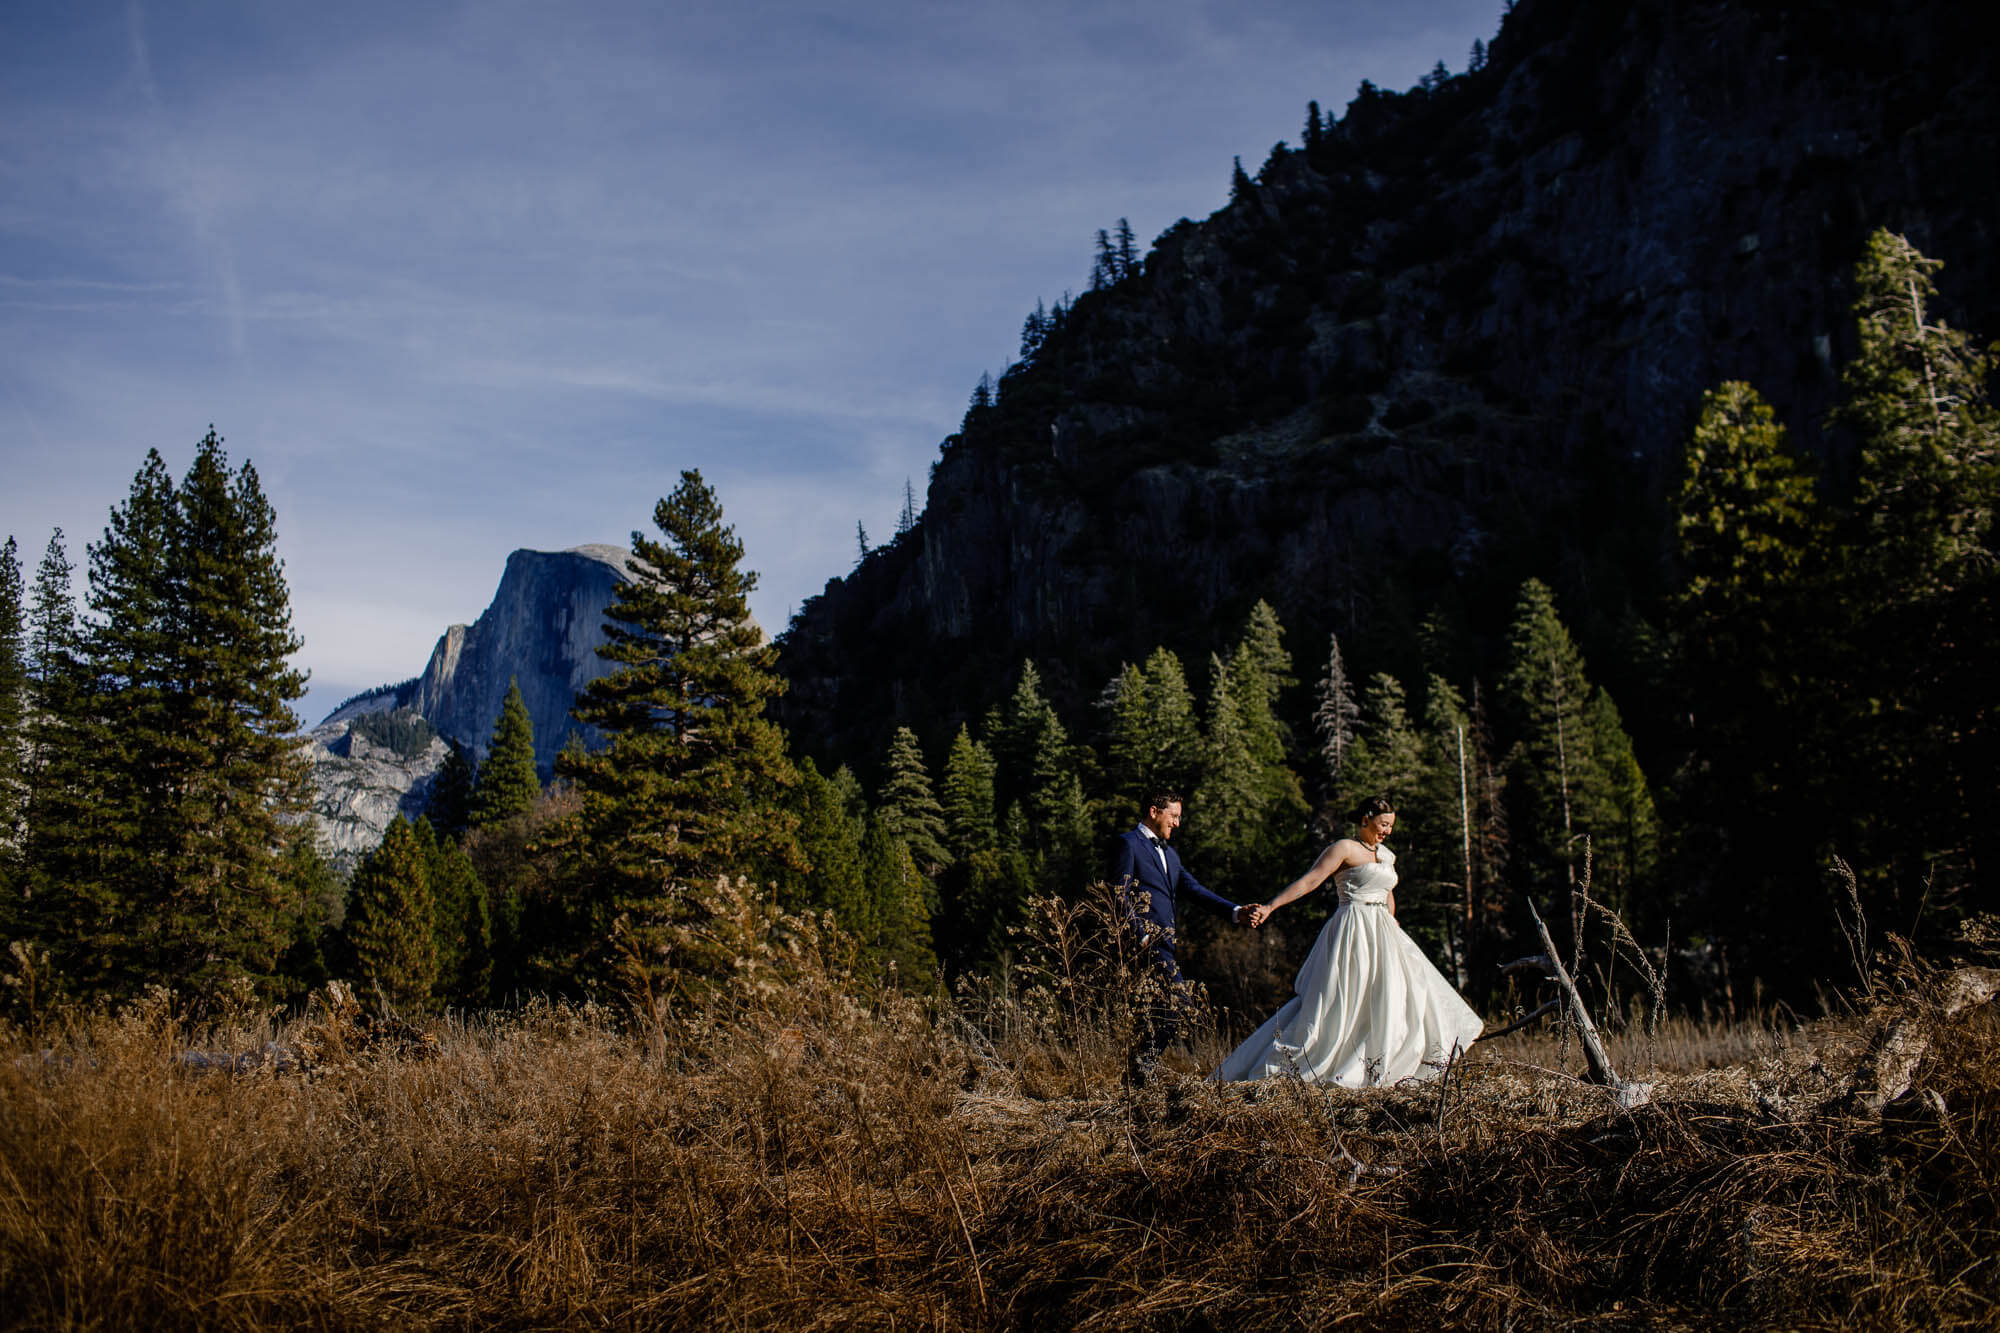 Bride leads the groom as they walk in front of Half Dome in Yosemite